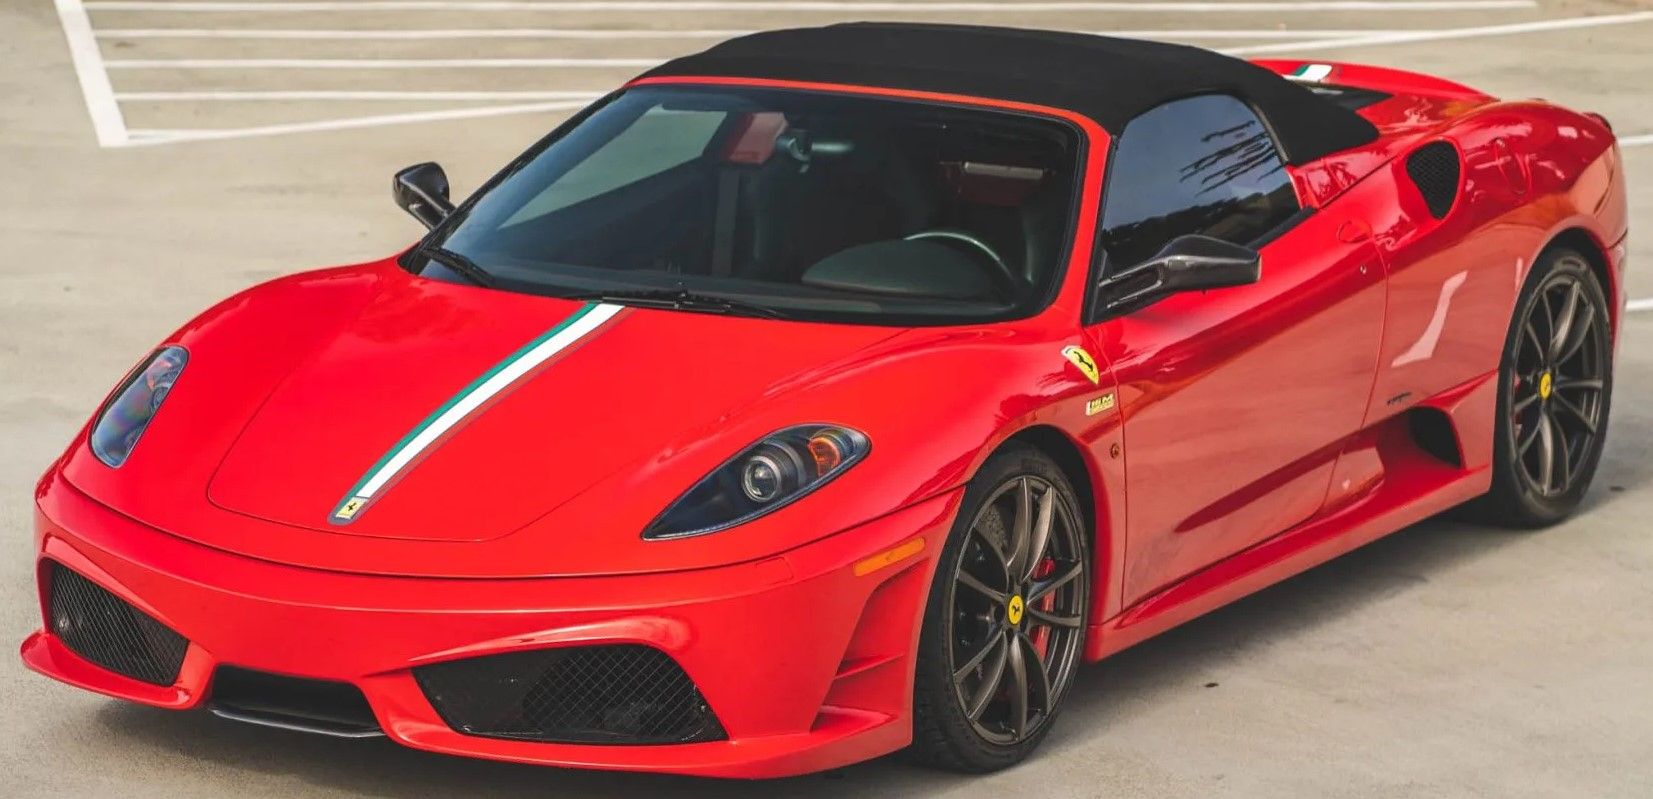 Red Ferrari F430 parked outdoors 